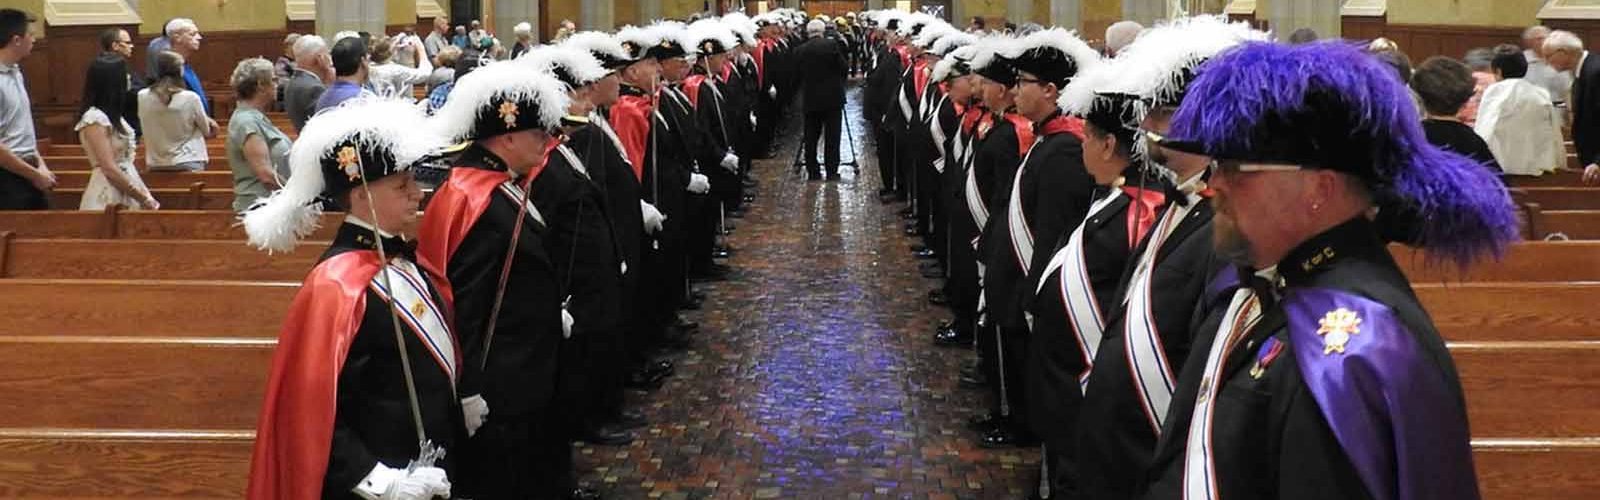 Photo of a Knights of Columbus Honor Guard at a funeral mass